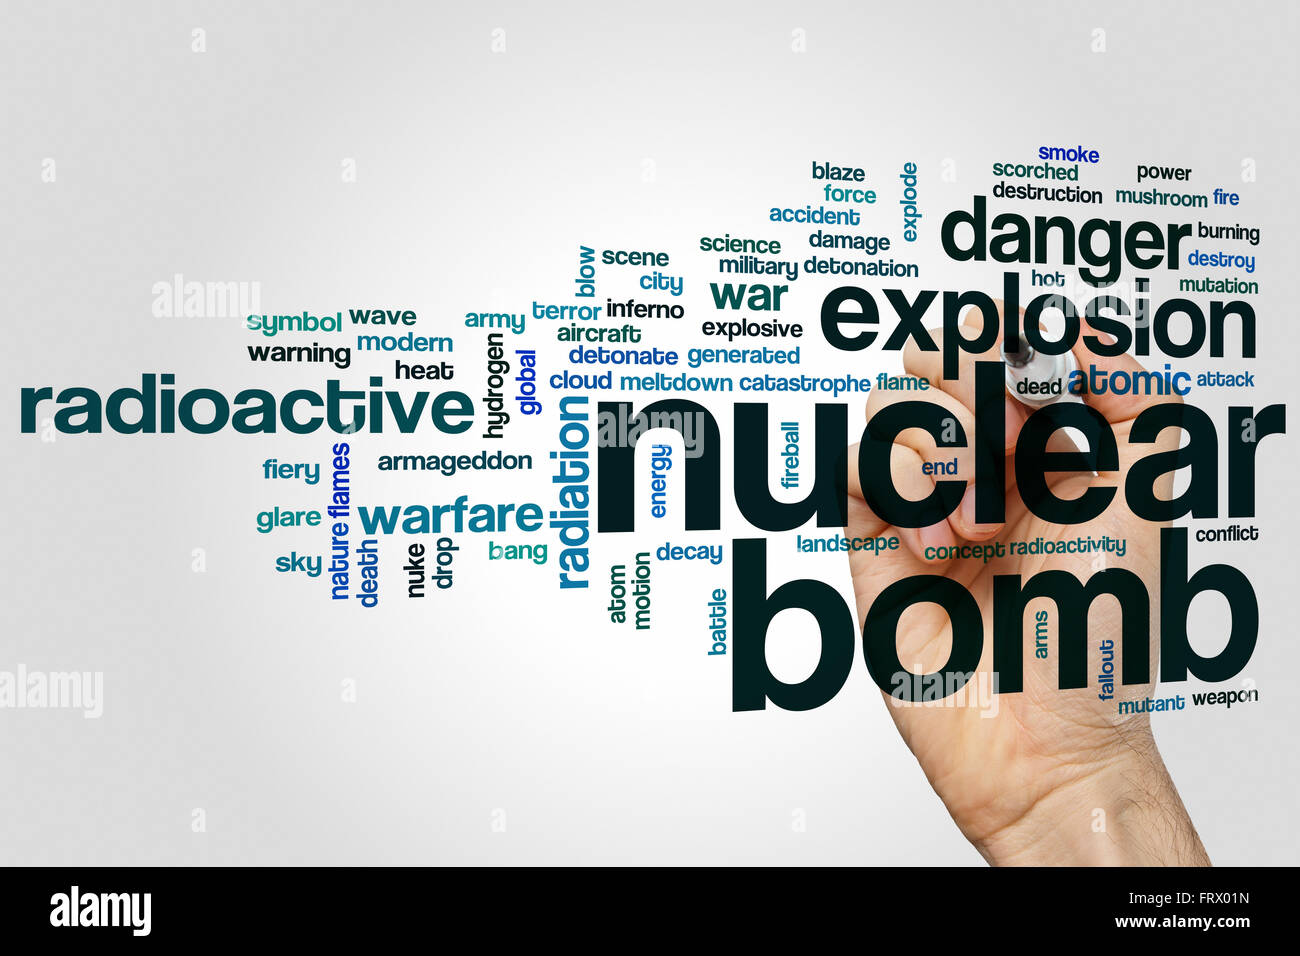 Nuclear bomb word cloud concept with explosion radioactive related tags Stock Photo